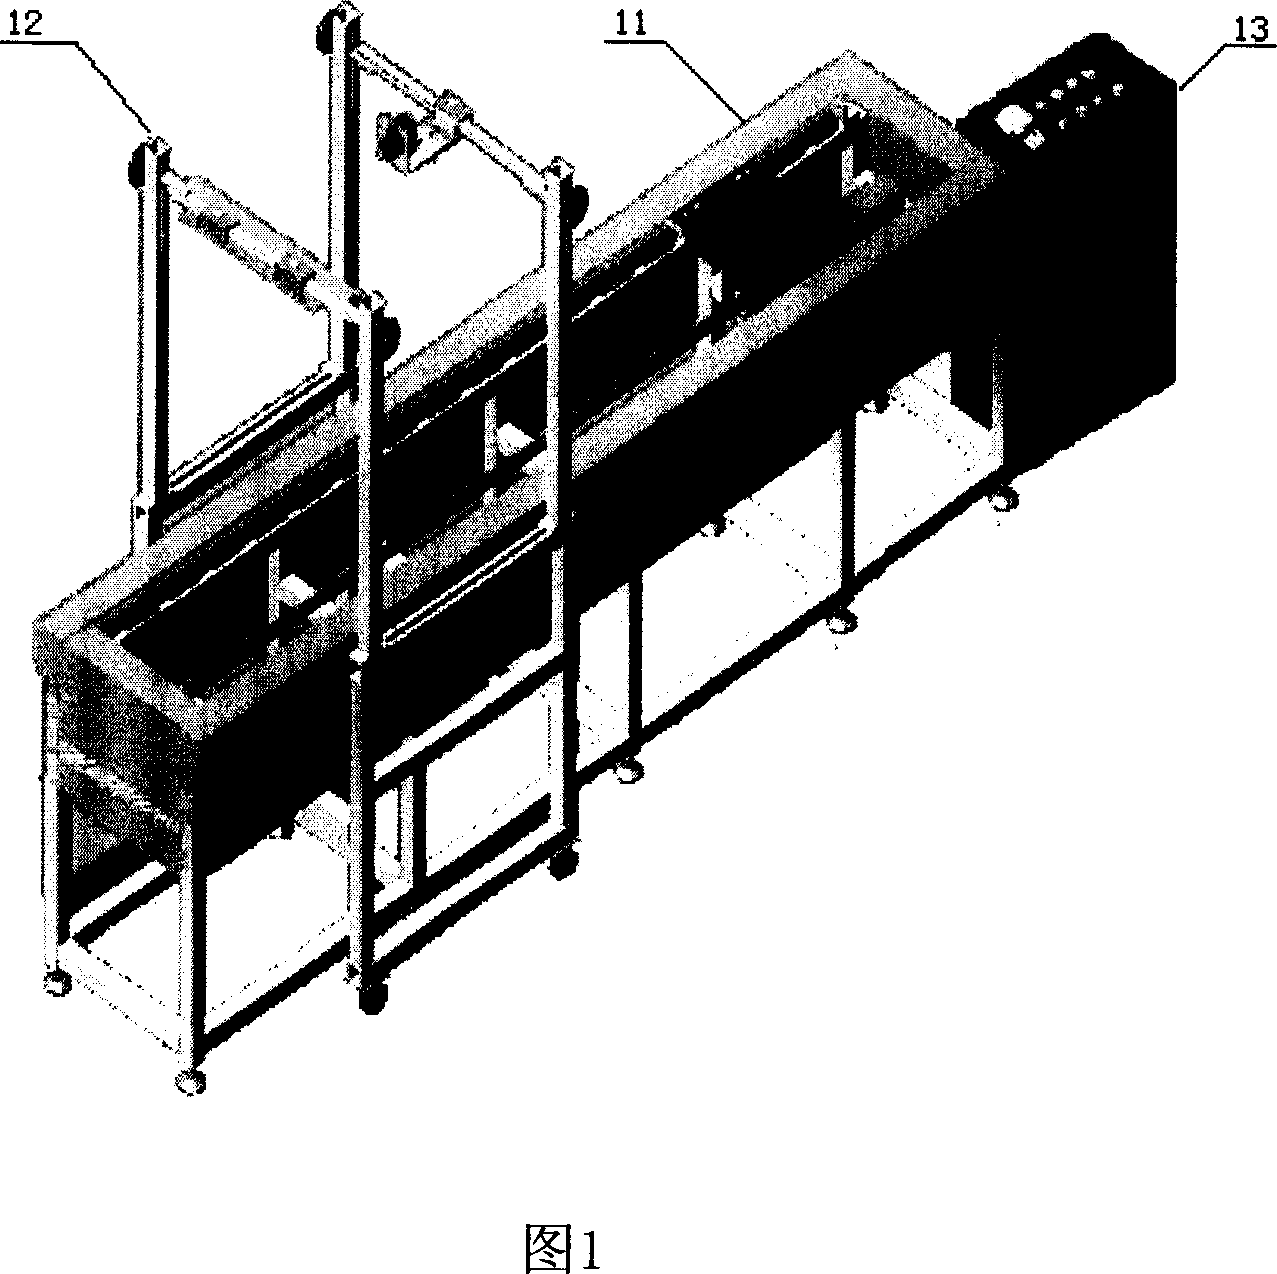 Strip steel surface defect detecting platform based on machine sight and its detecting method